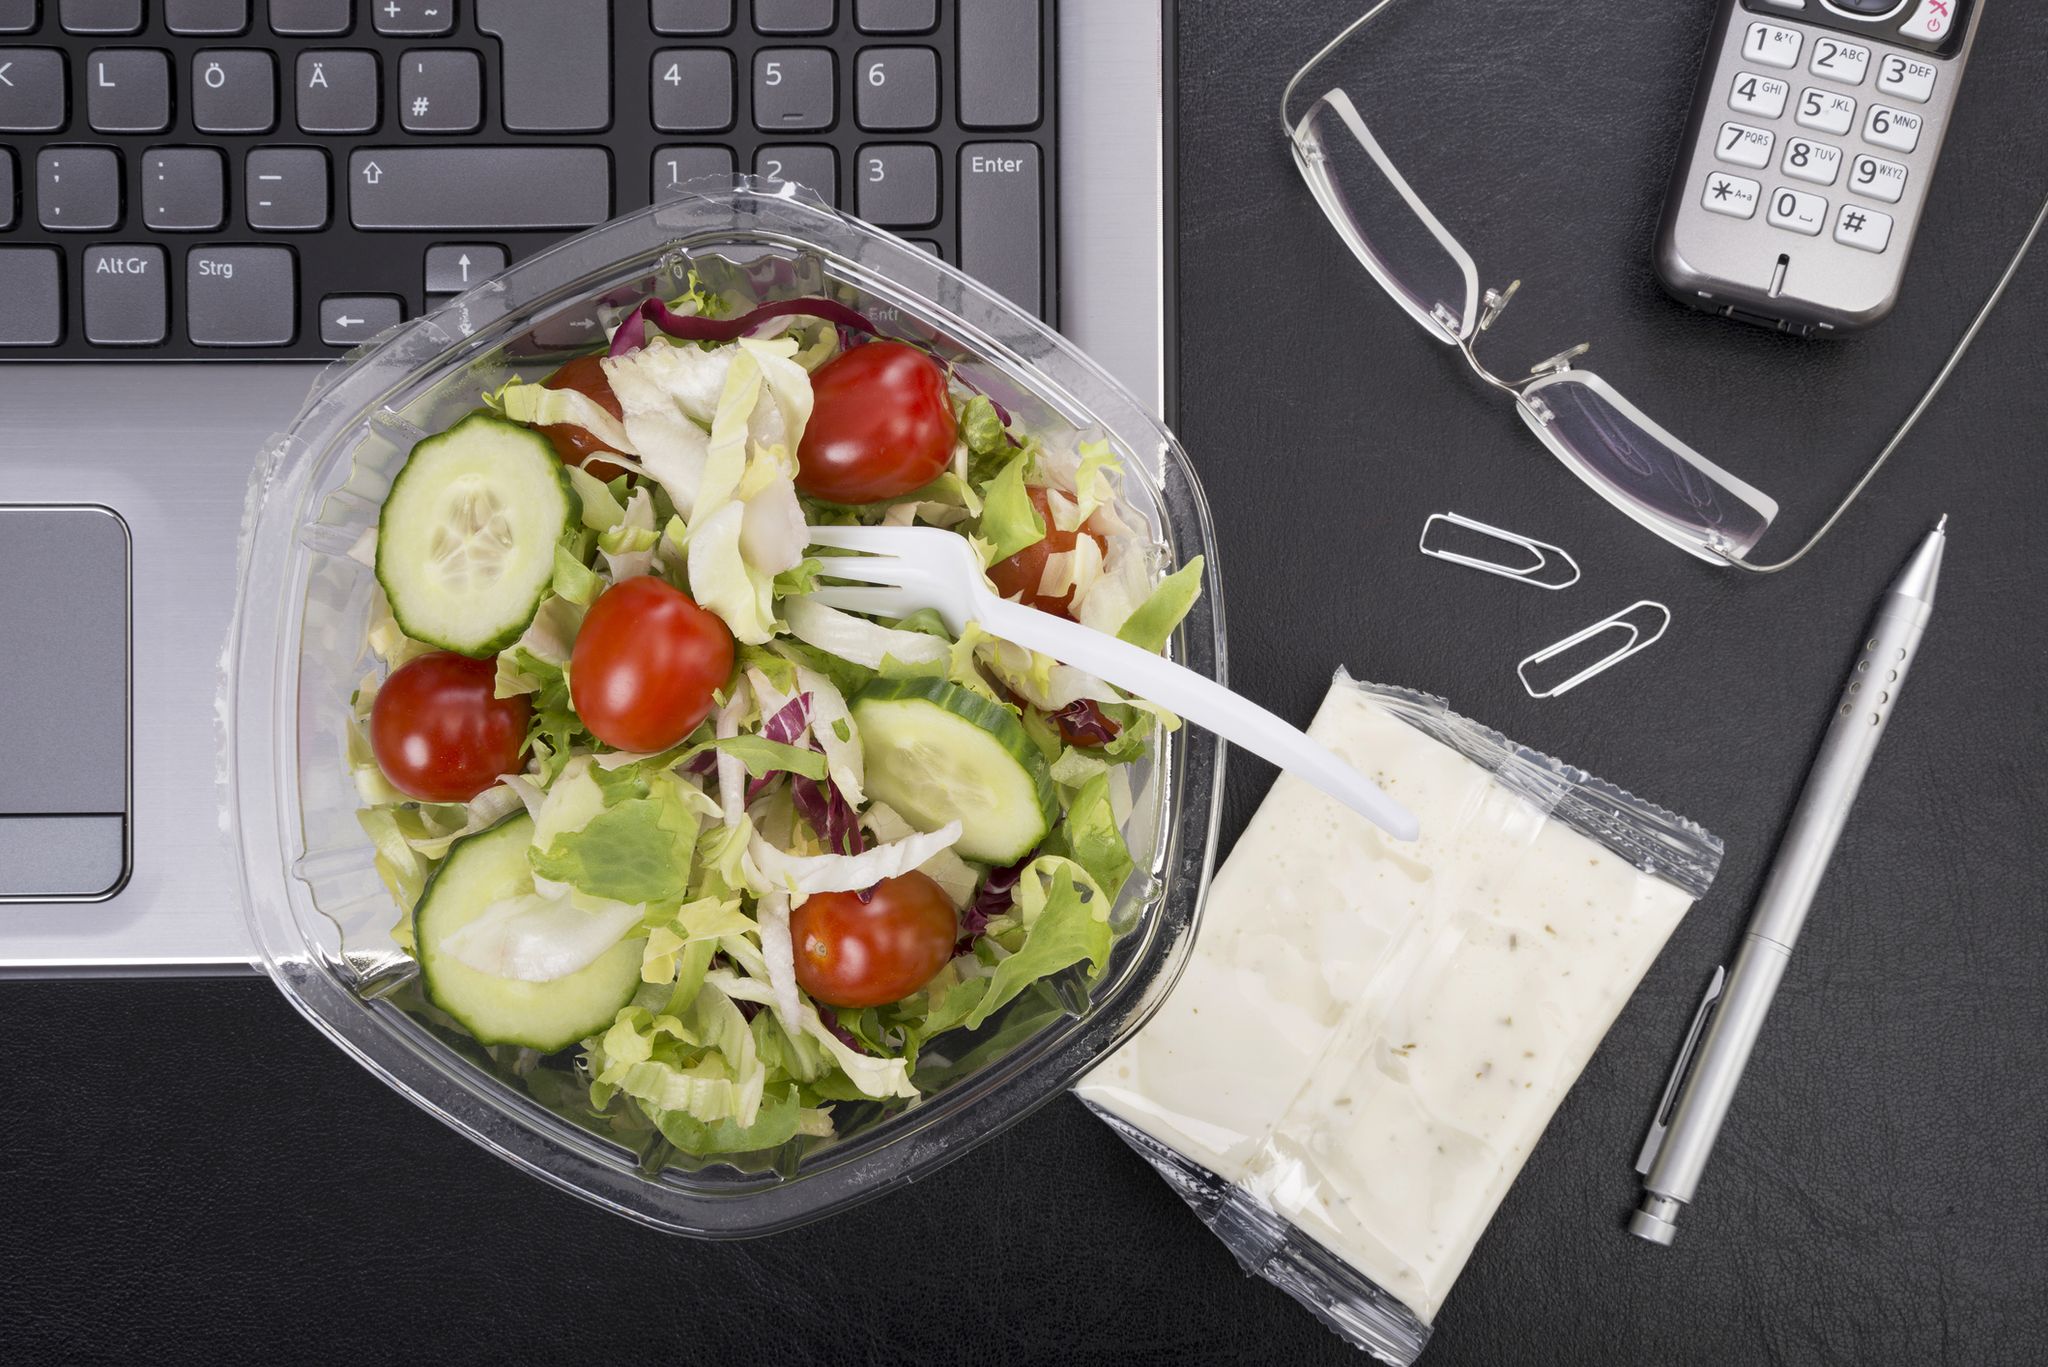 Workplace with mixed salad on laptop